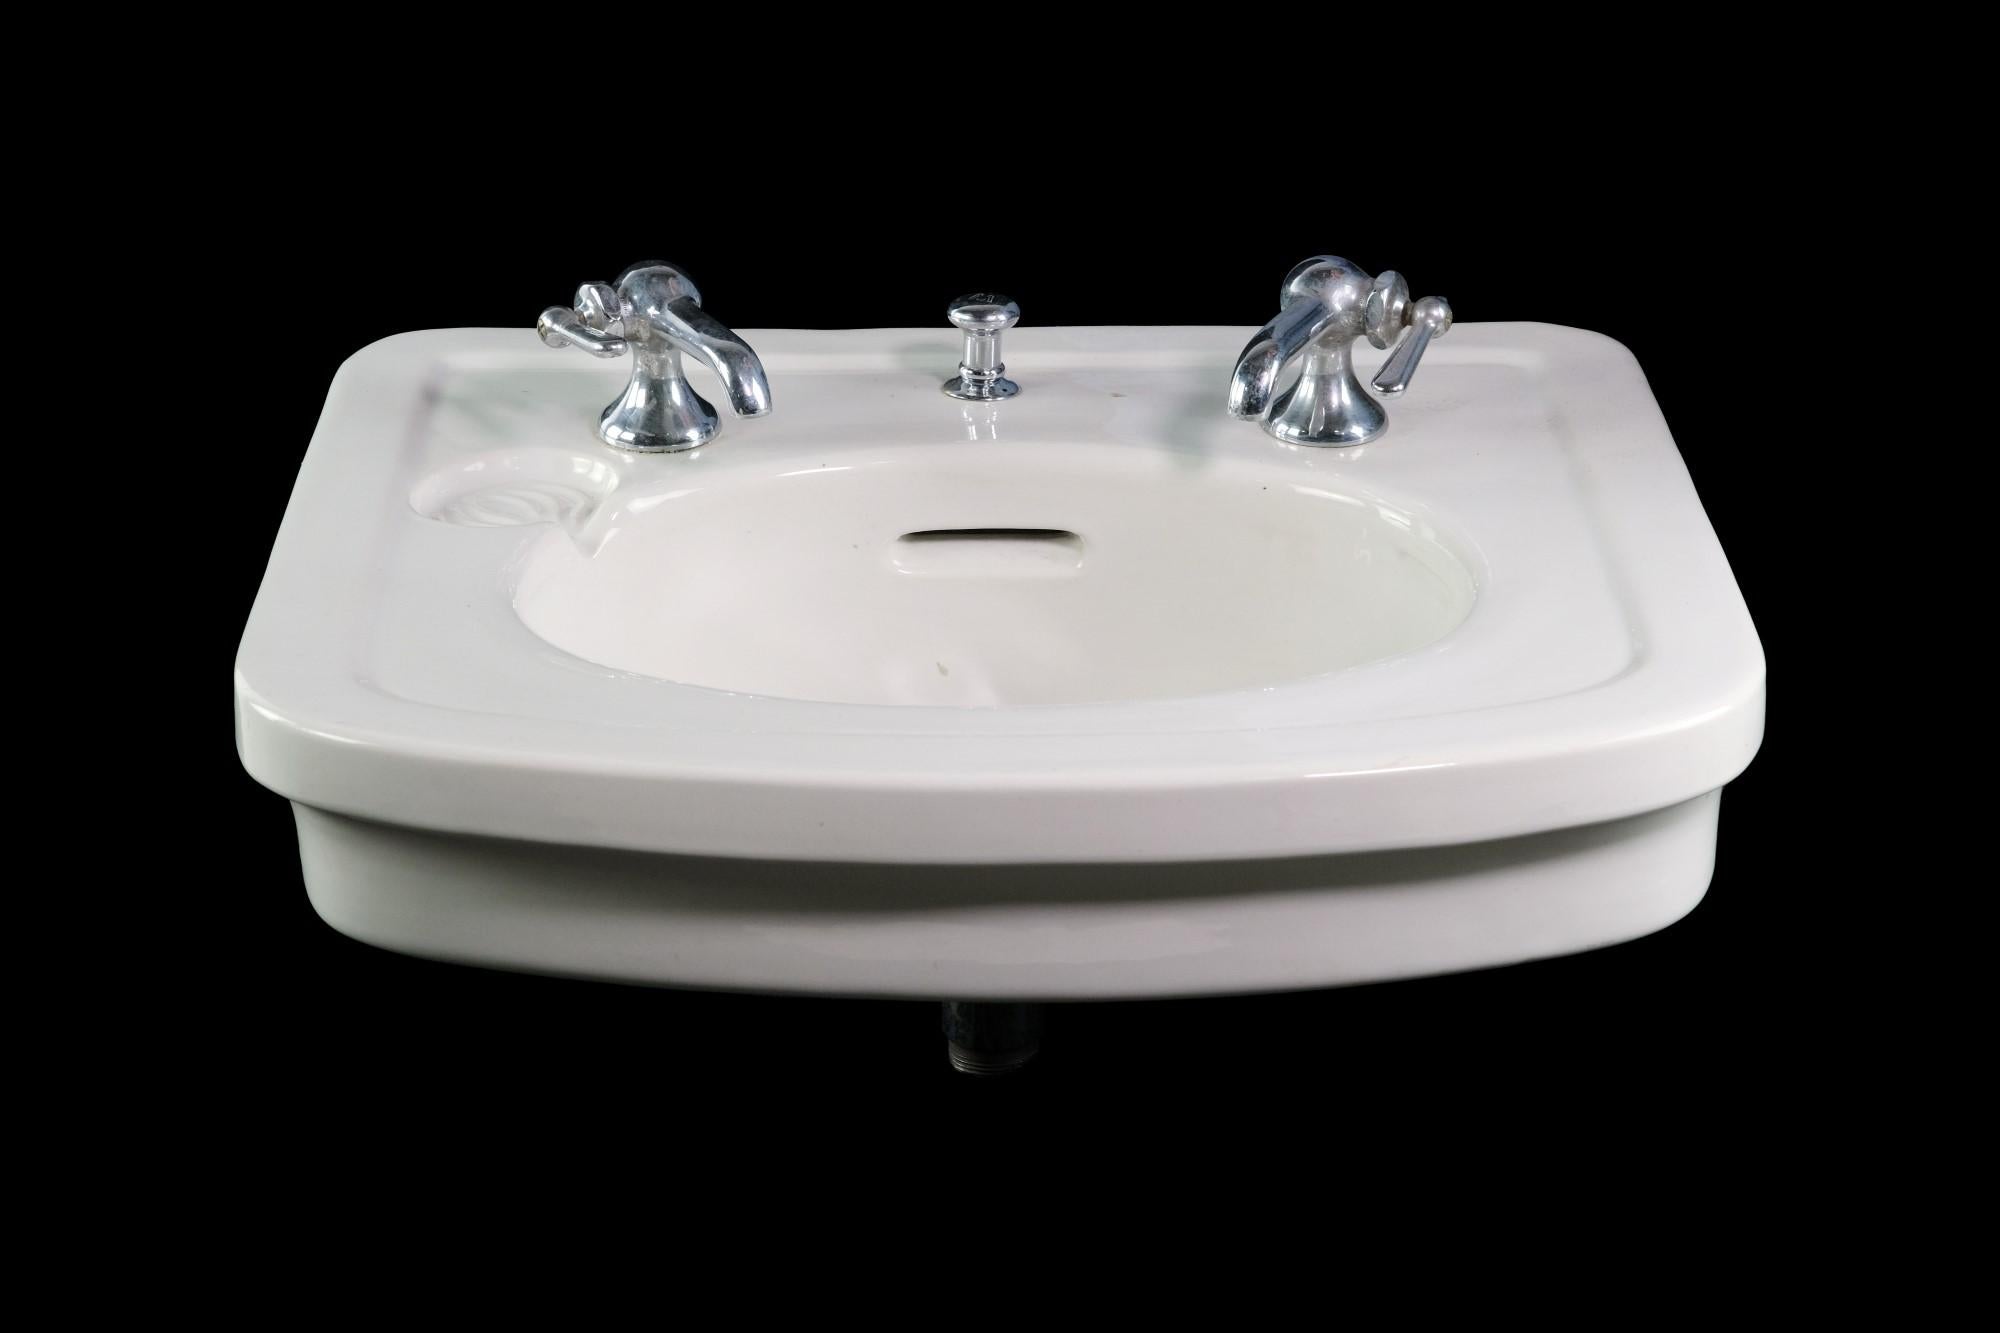 20th Century white ceramic wall mount sink with an oval basin. Oval front design. Features nickel hardware. This can be seen at our 400 Gilligan St location in Scranton, PA.